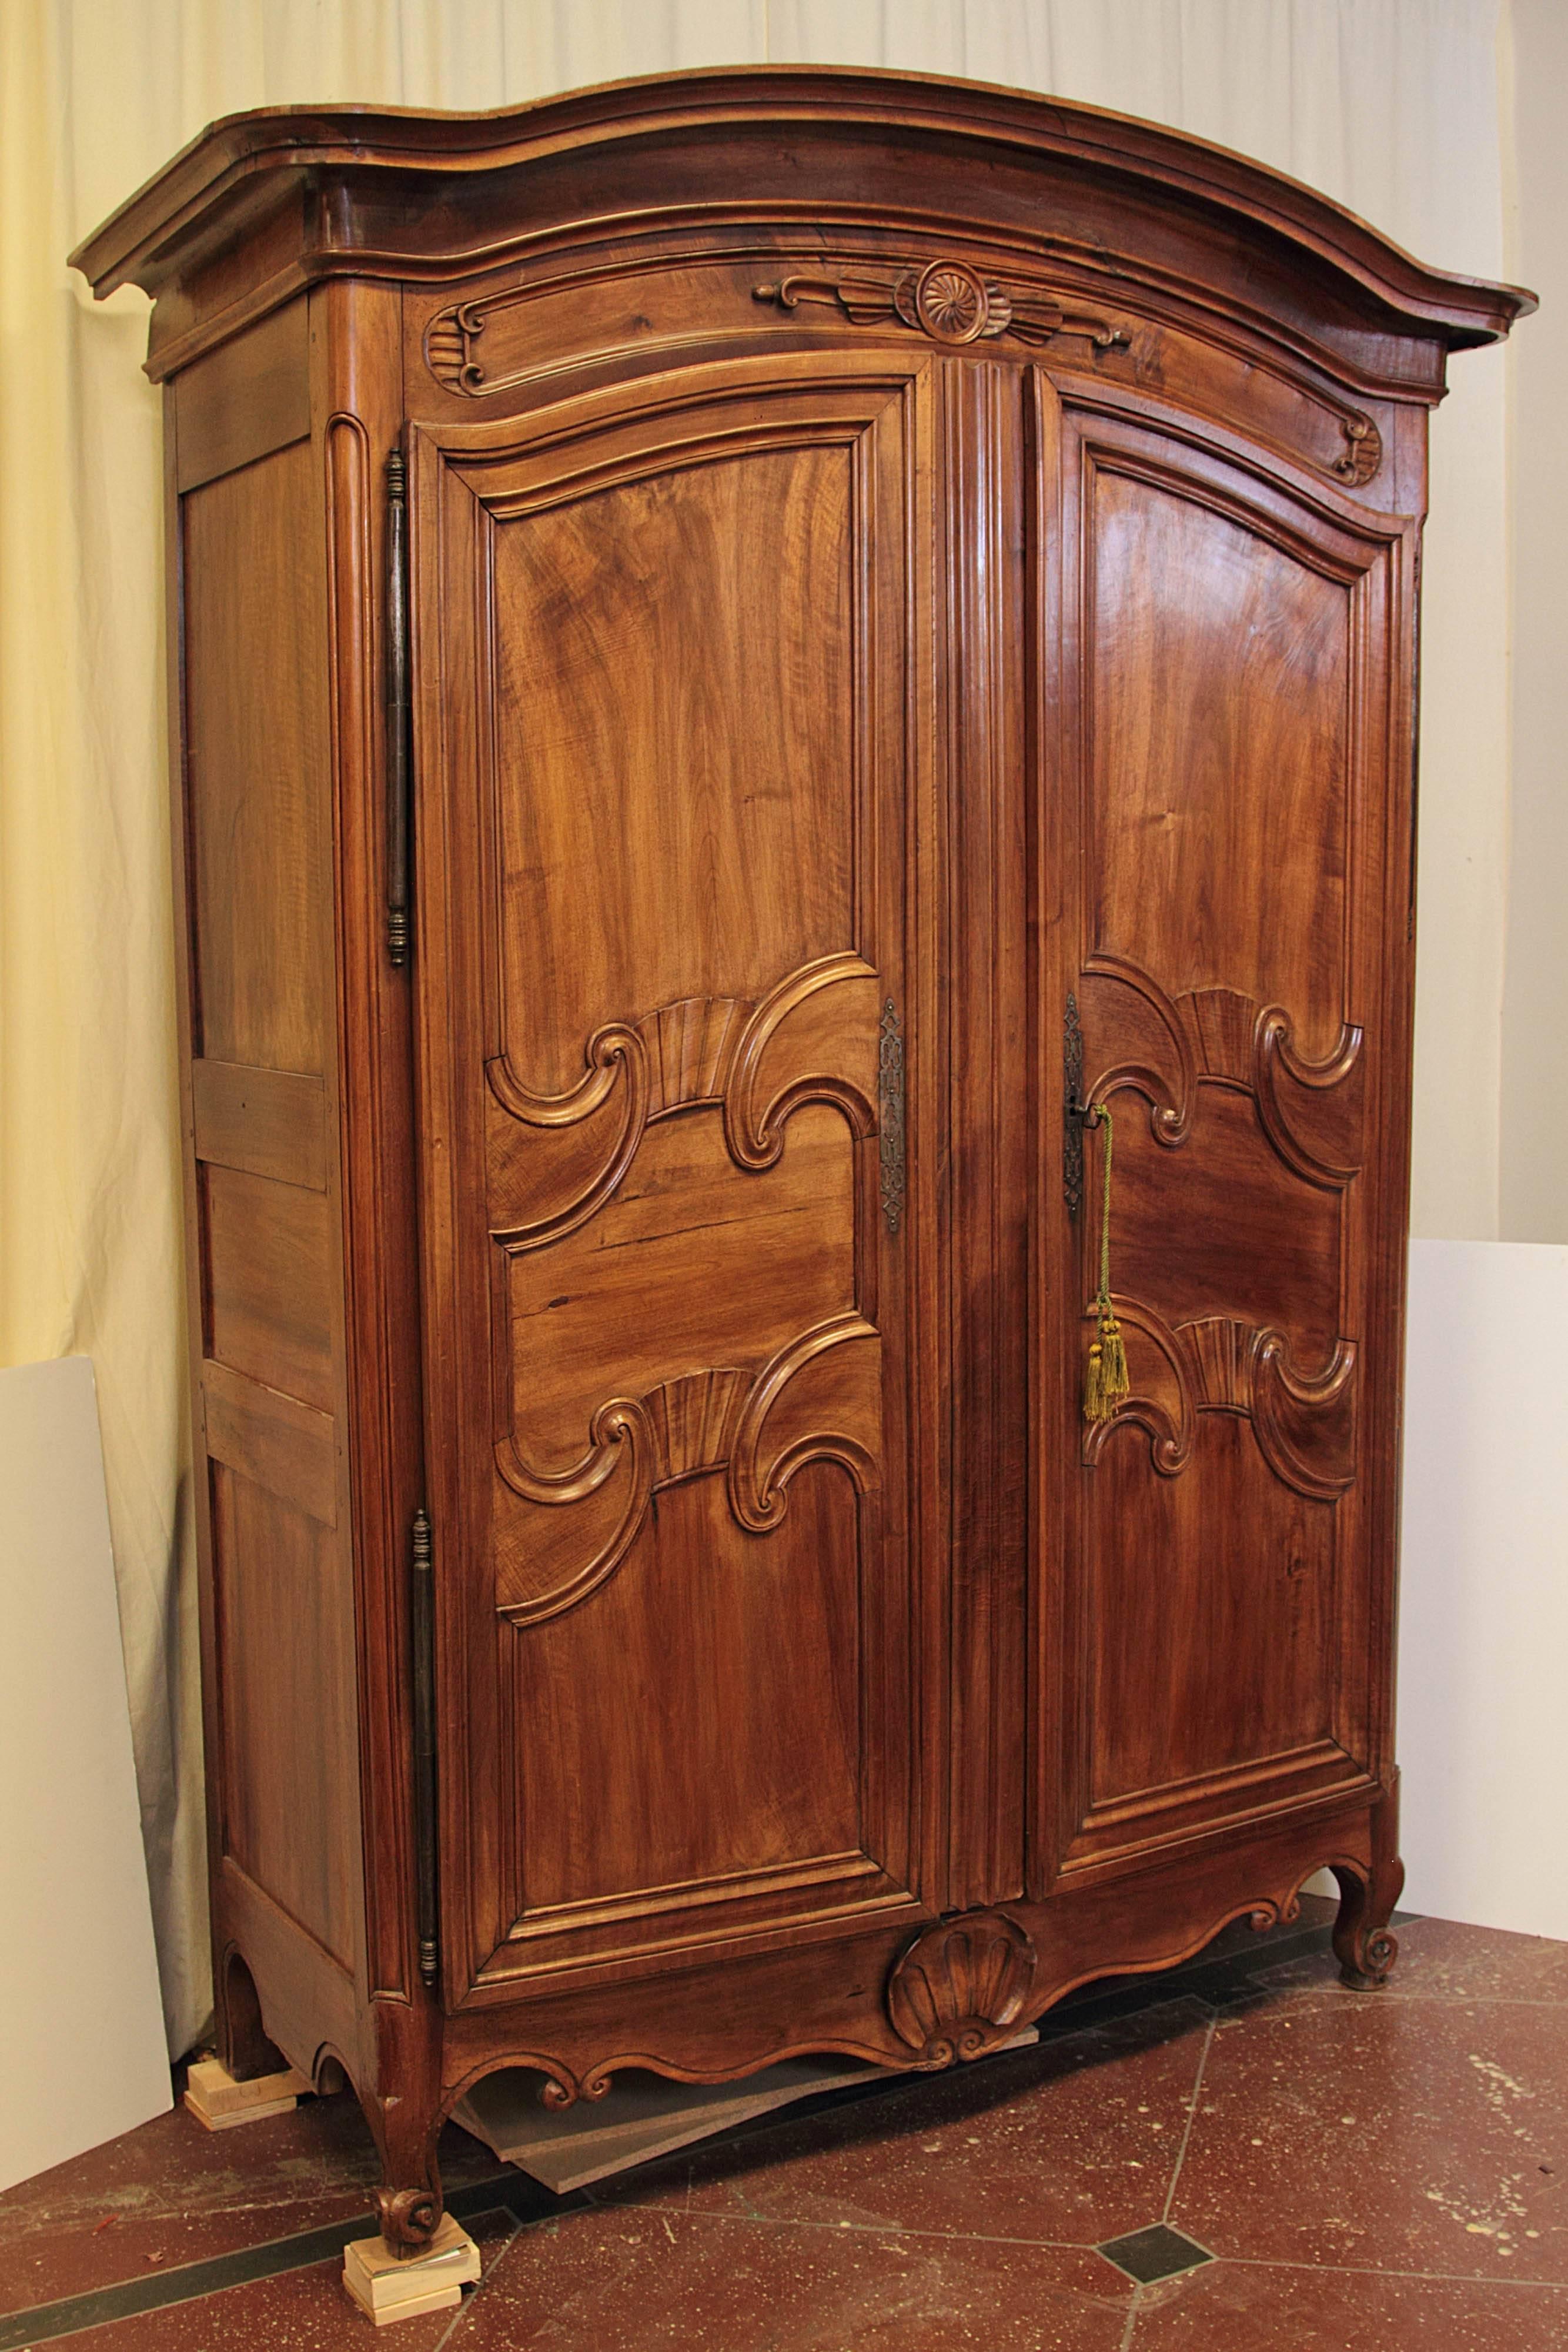 19th century French armoire. Curved feet and shell motif at bottom, circa 1840.